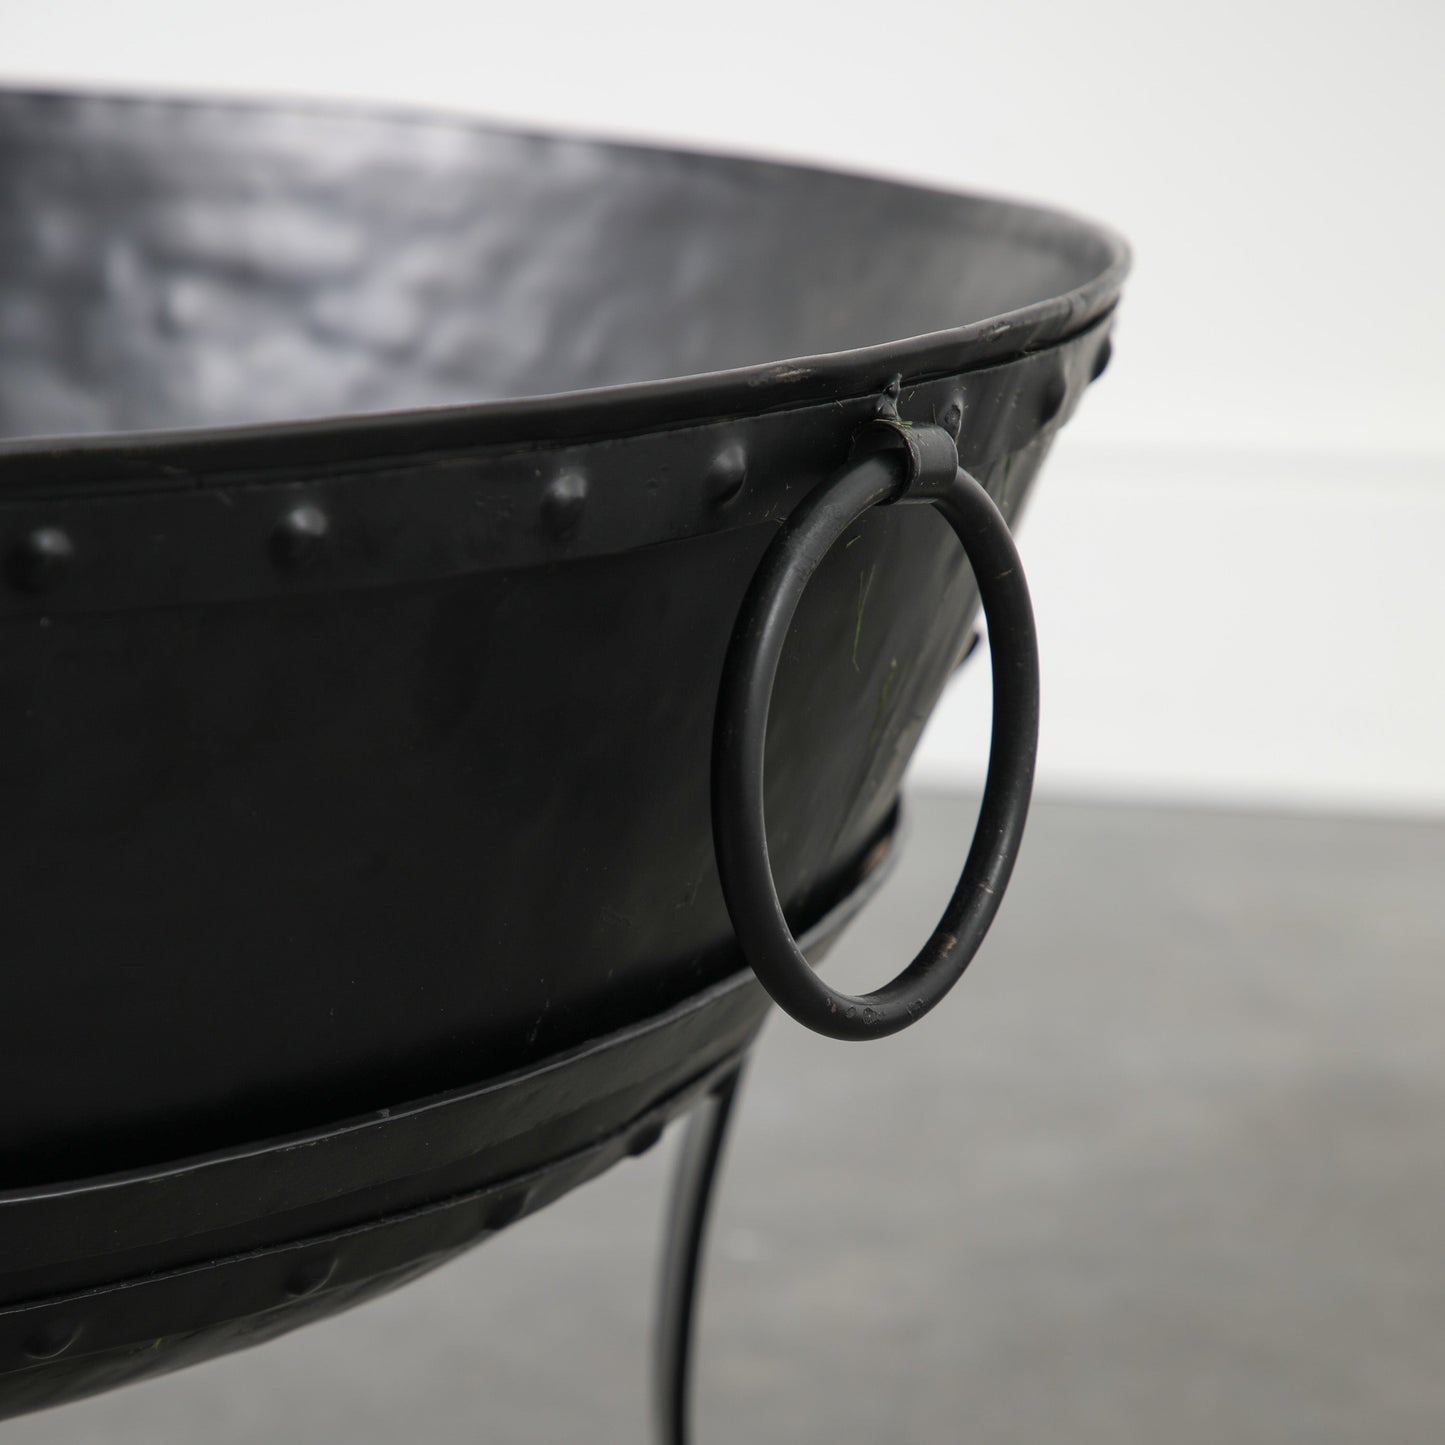 A black Thurlstone Firepit, perfect for interior decor and available on Kikiathome.co.uk.